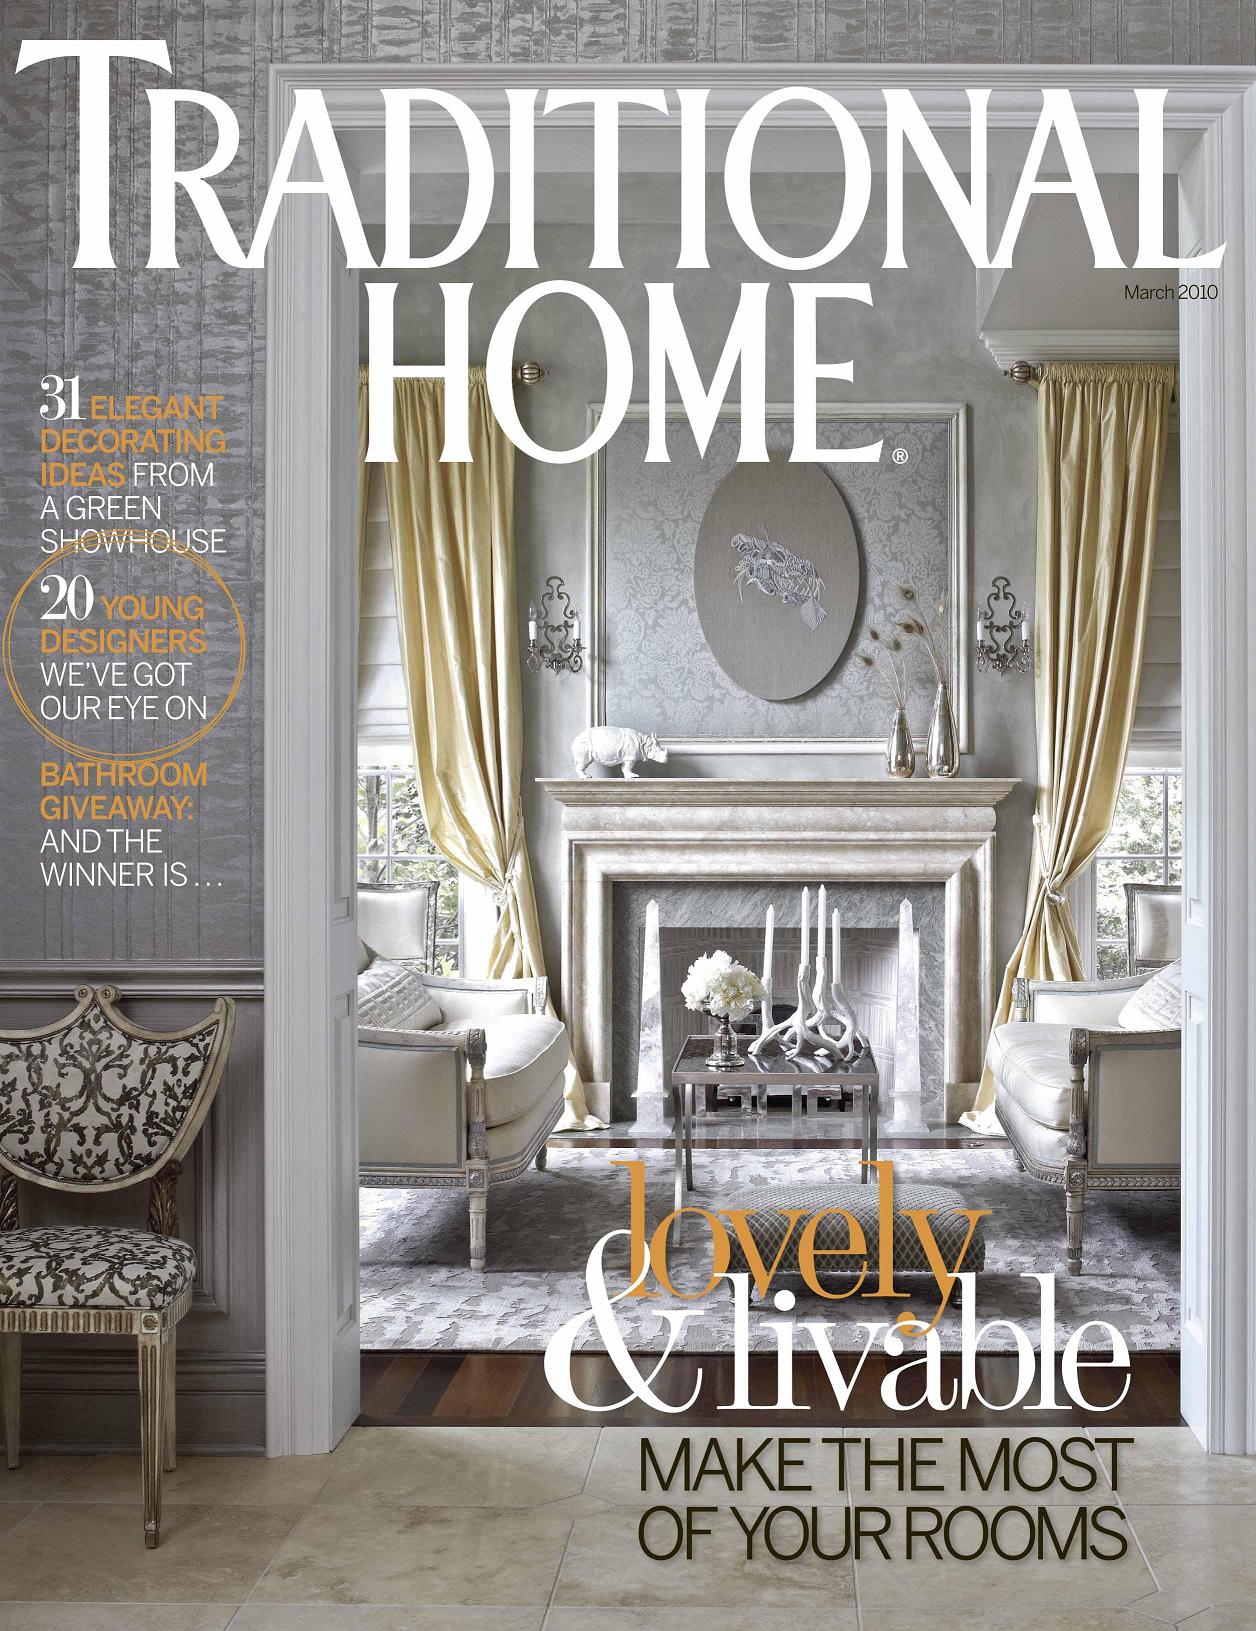 Traditional Home / March 2010